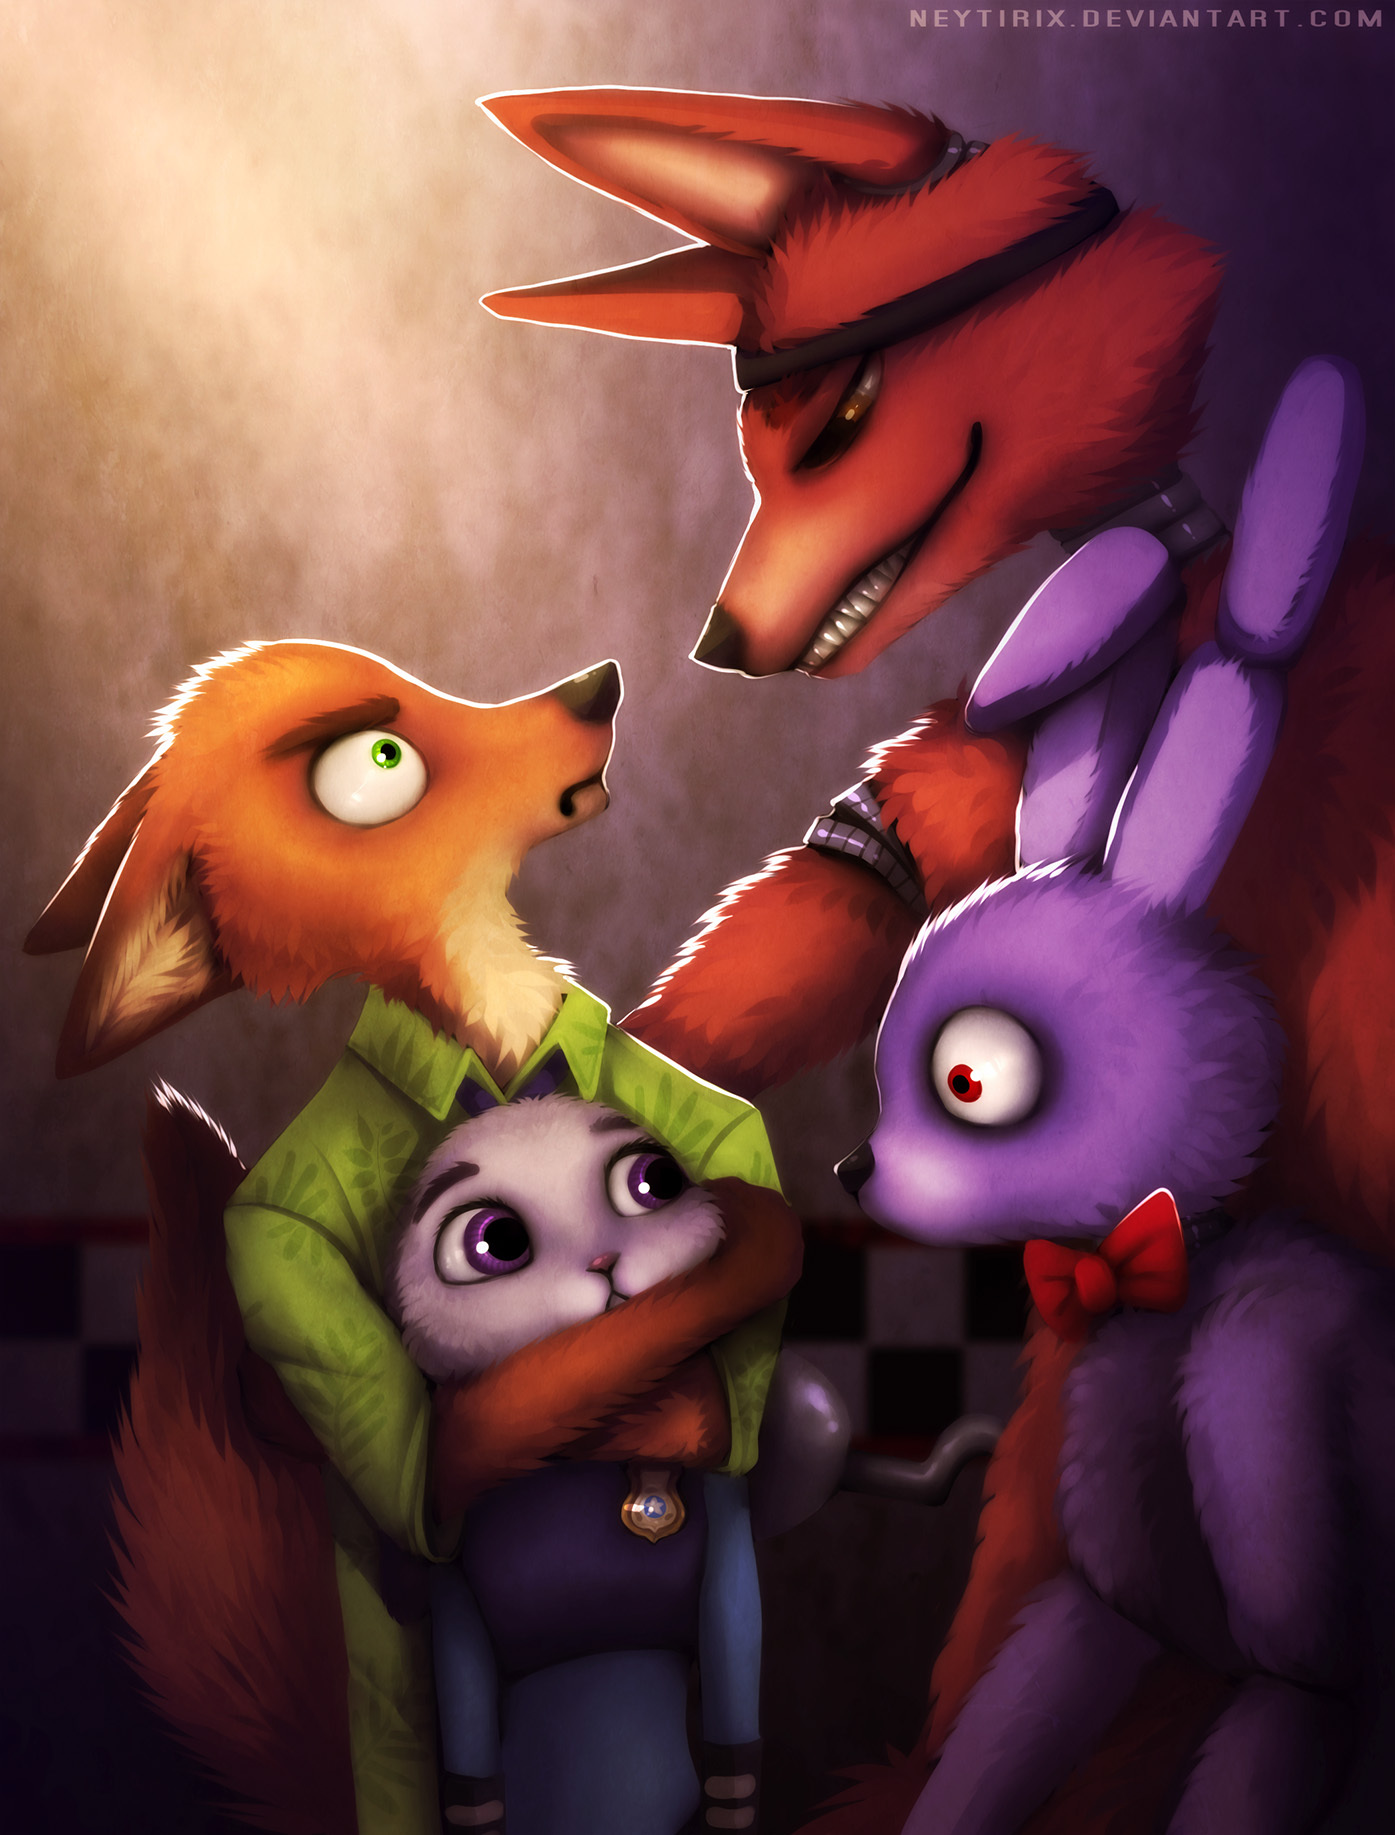 She is mine! - Neytirix, Art, Speed ??painting, Zootopia, Crossover, Five nights at freddys, Nick wilde, Judy hopps, Video